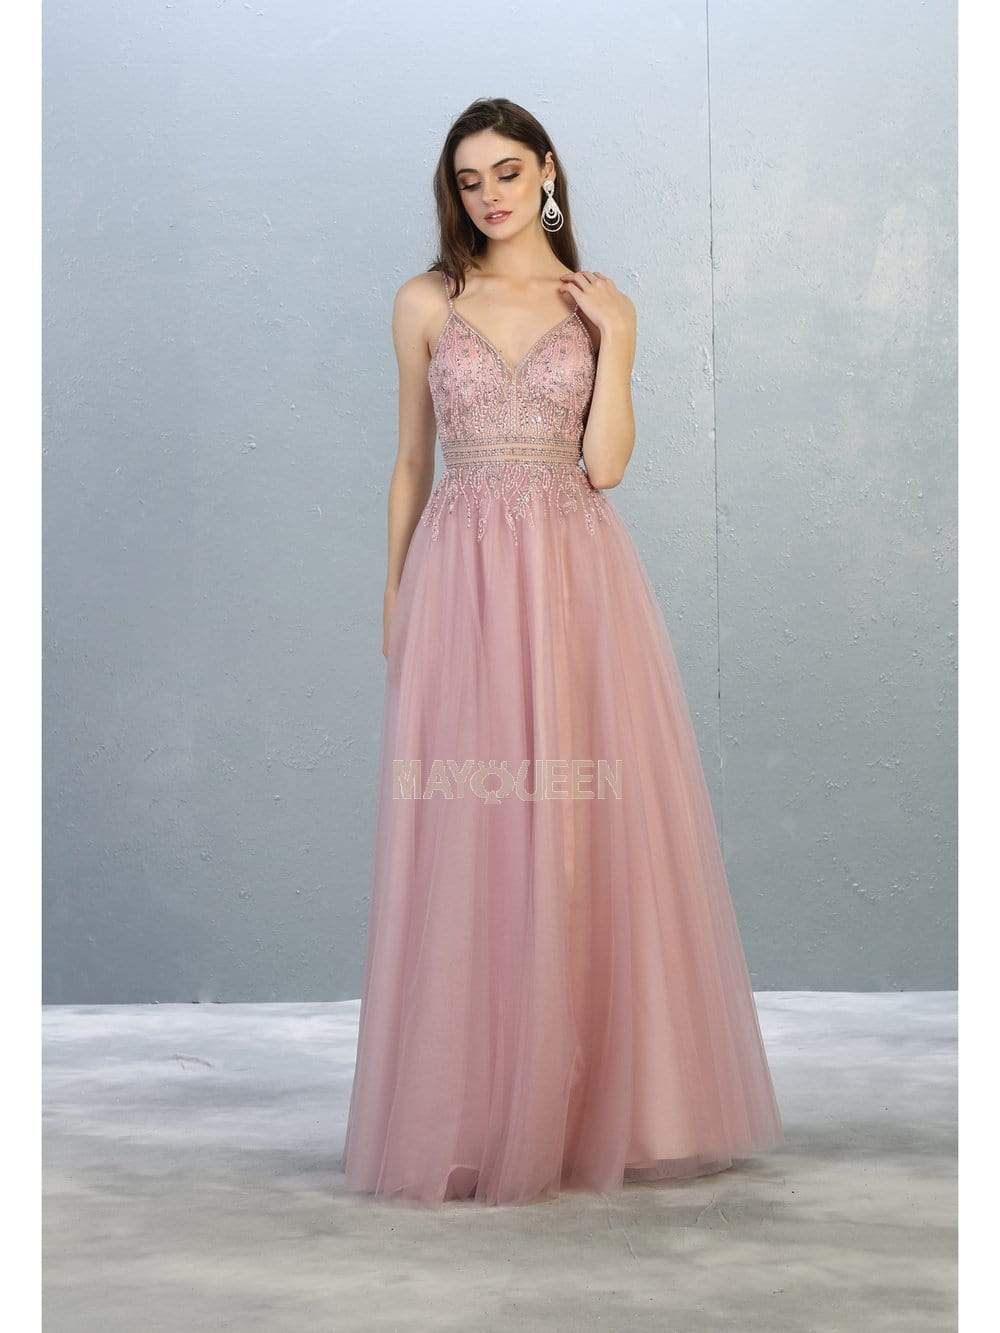 Image of May Queen - RQ7841 Bead Embellished Deep V-Neck A-Line Dress